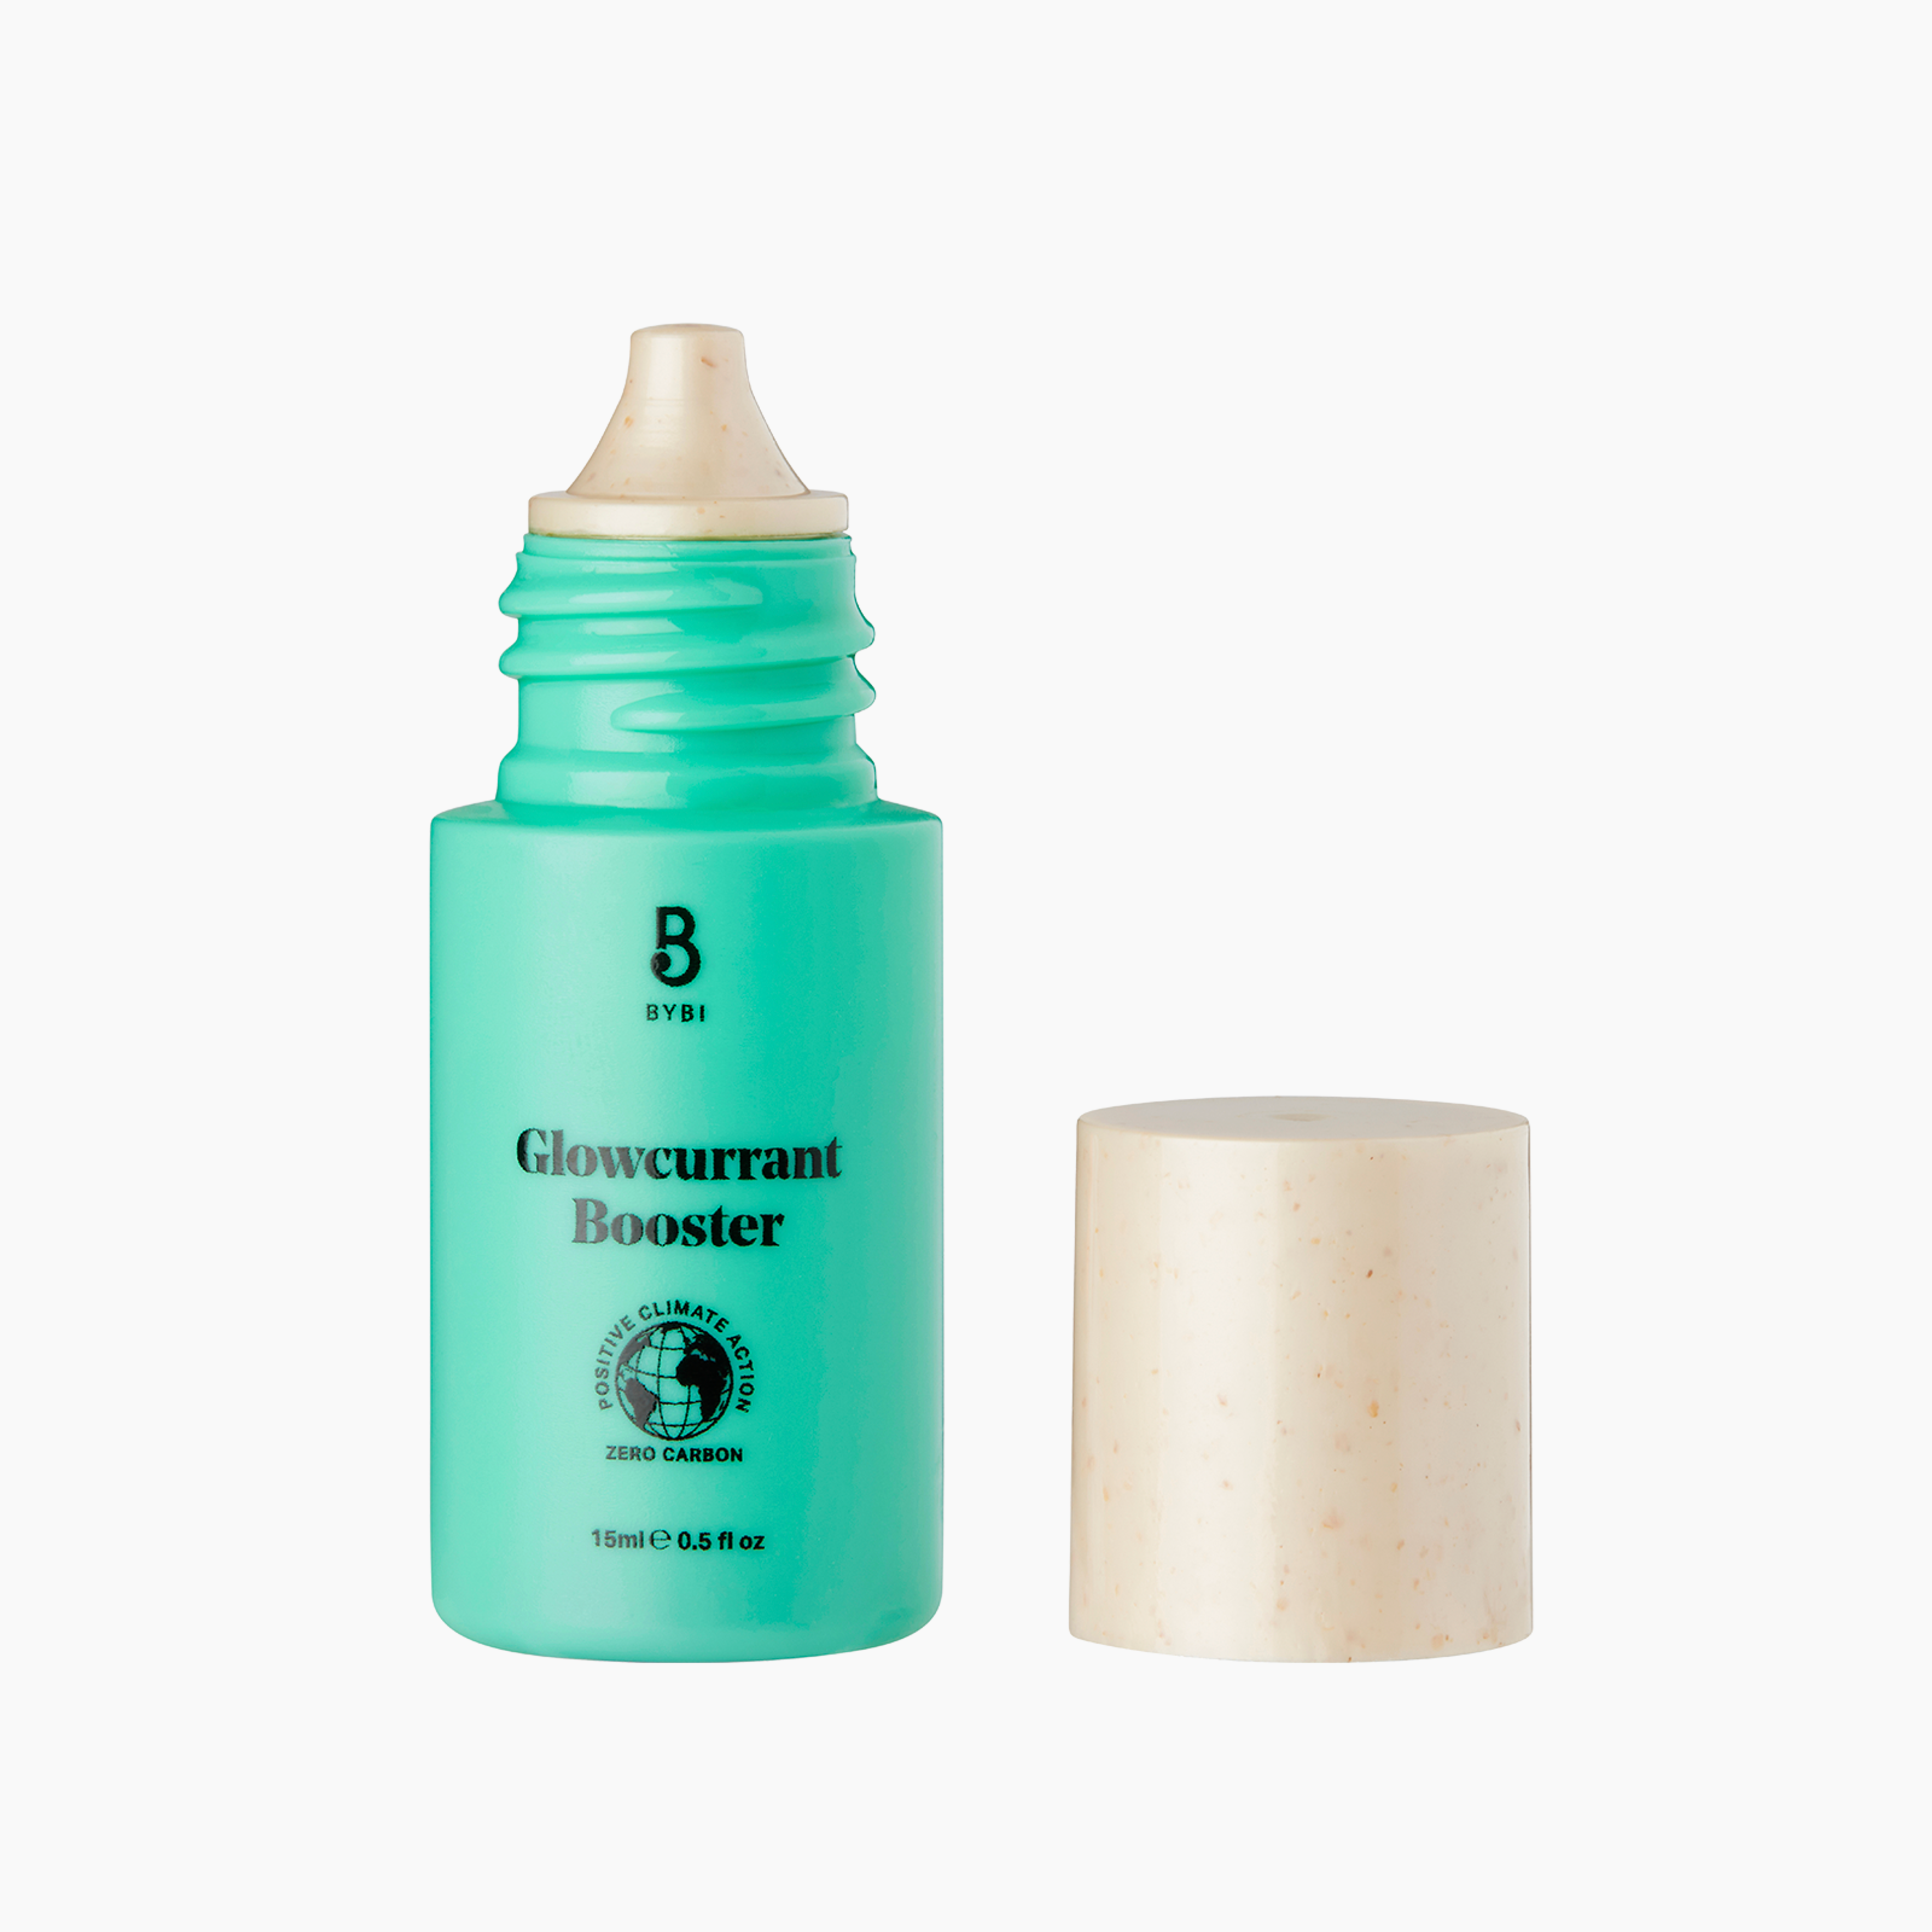 Glowcurrant Booster / Every Day Vegan Facial Oil